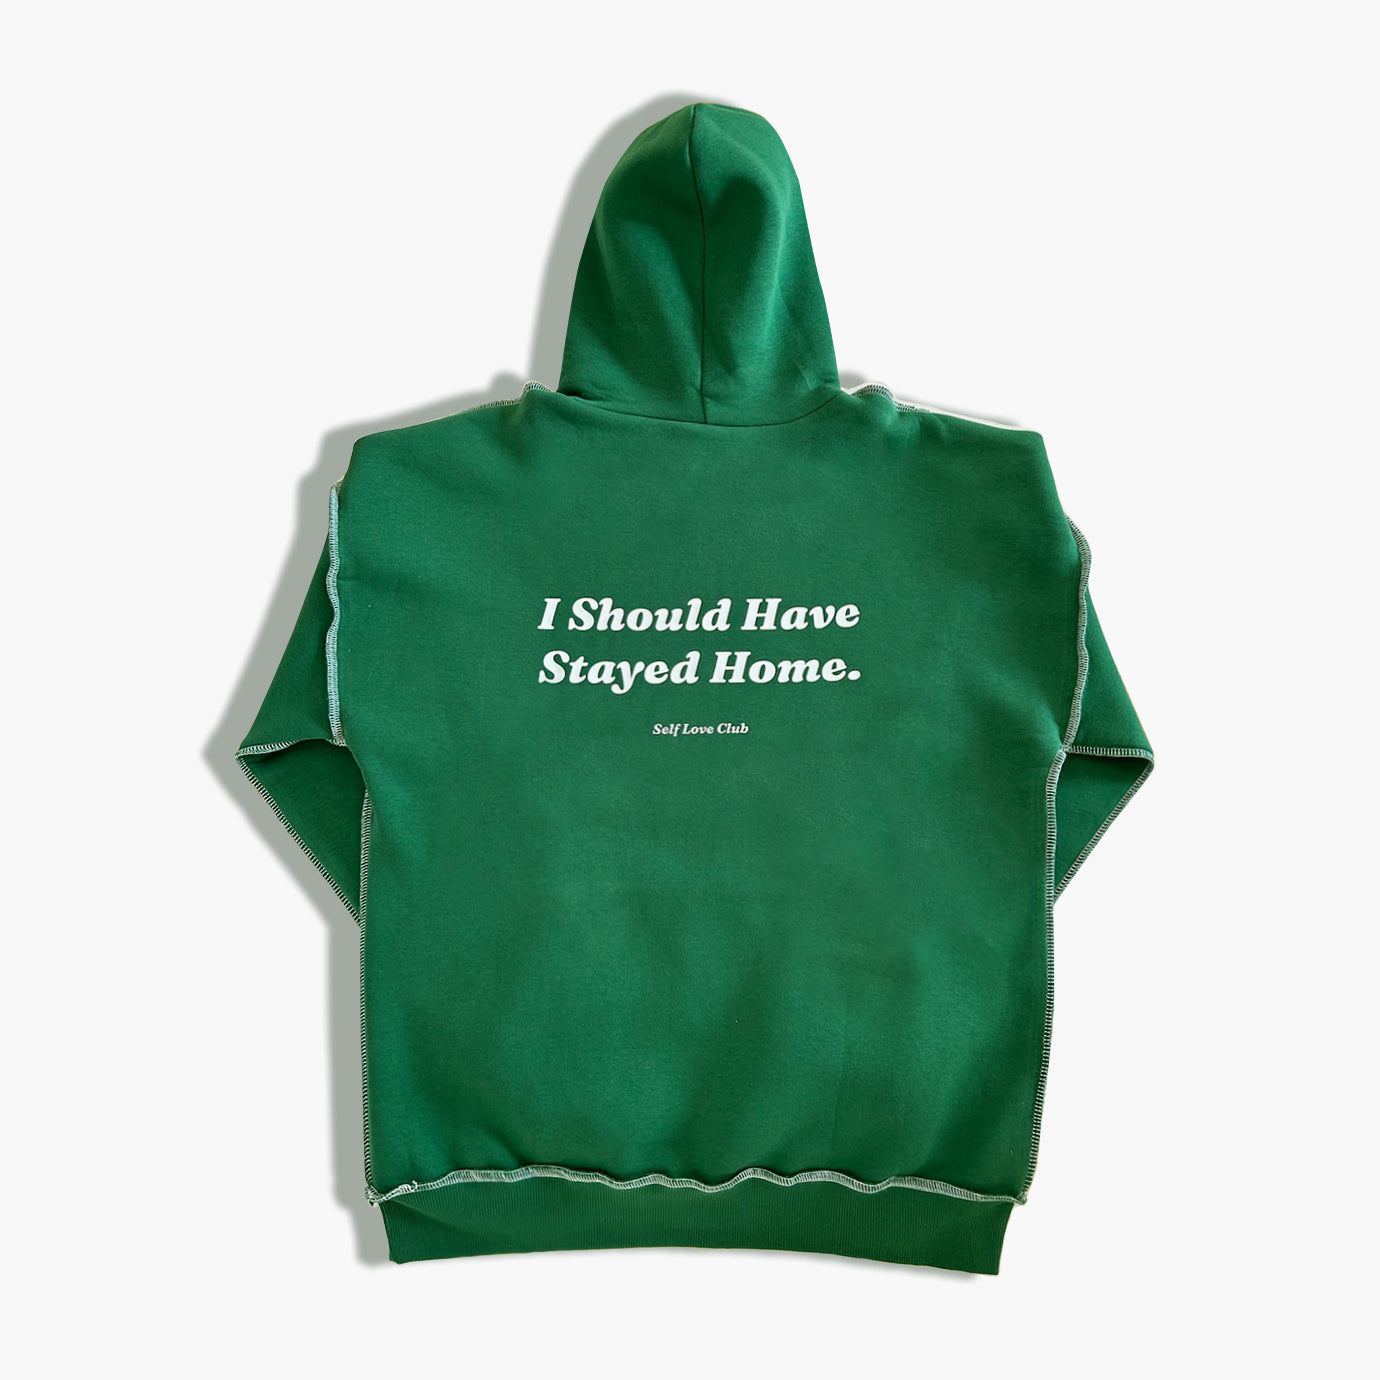 I should have stayed home. Hoodie